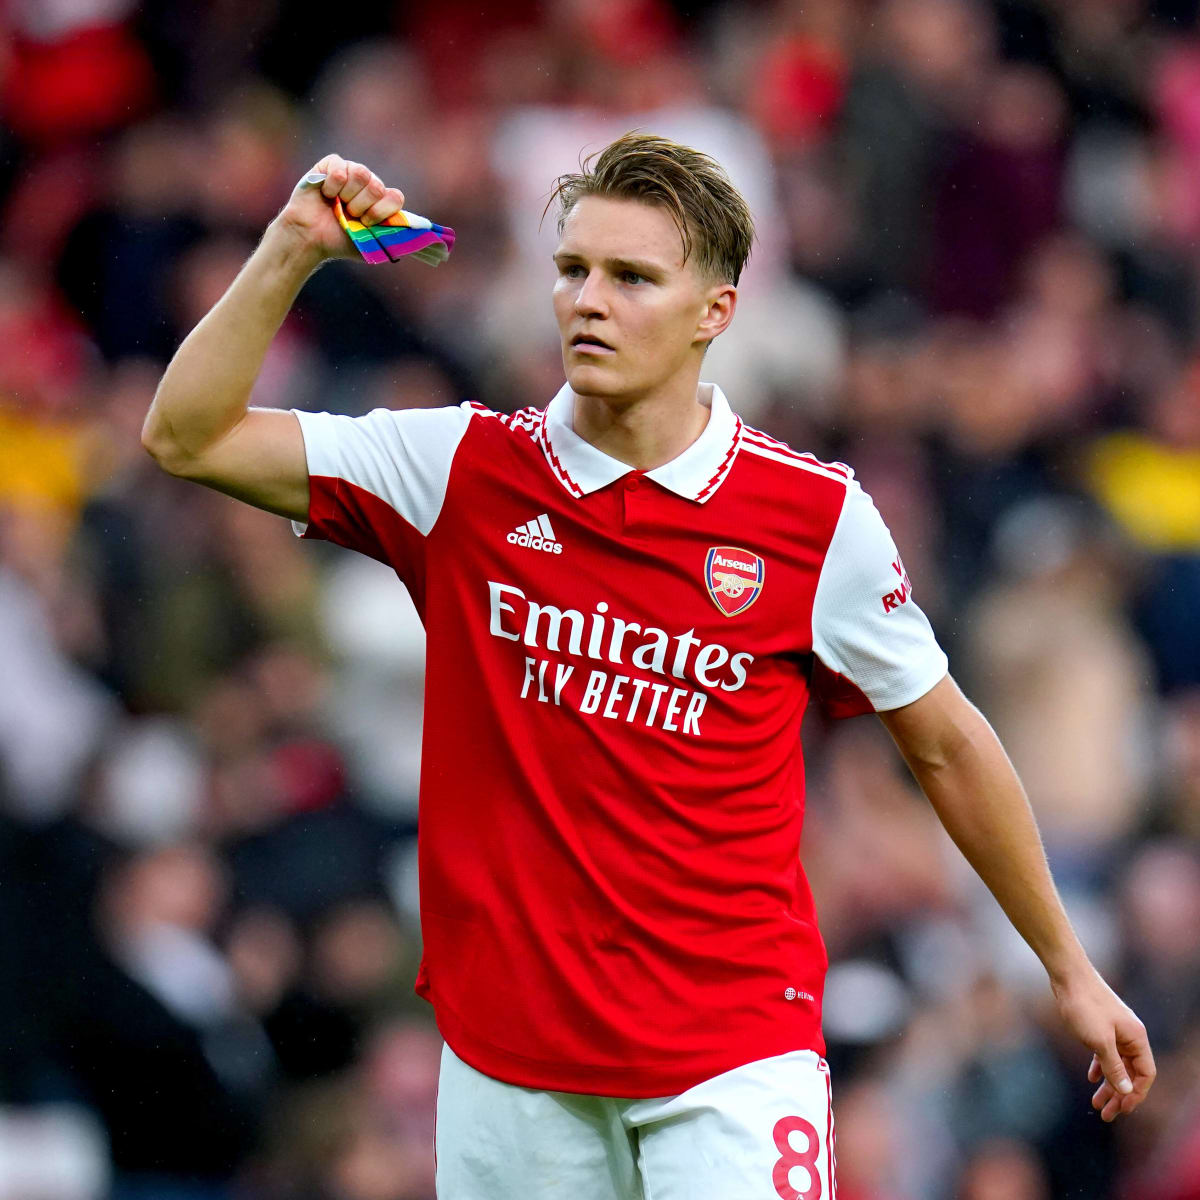 Sign One Player From Arsenal: Martin Odegaard Illustrated Chelsea FC News, Analysis and More